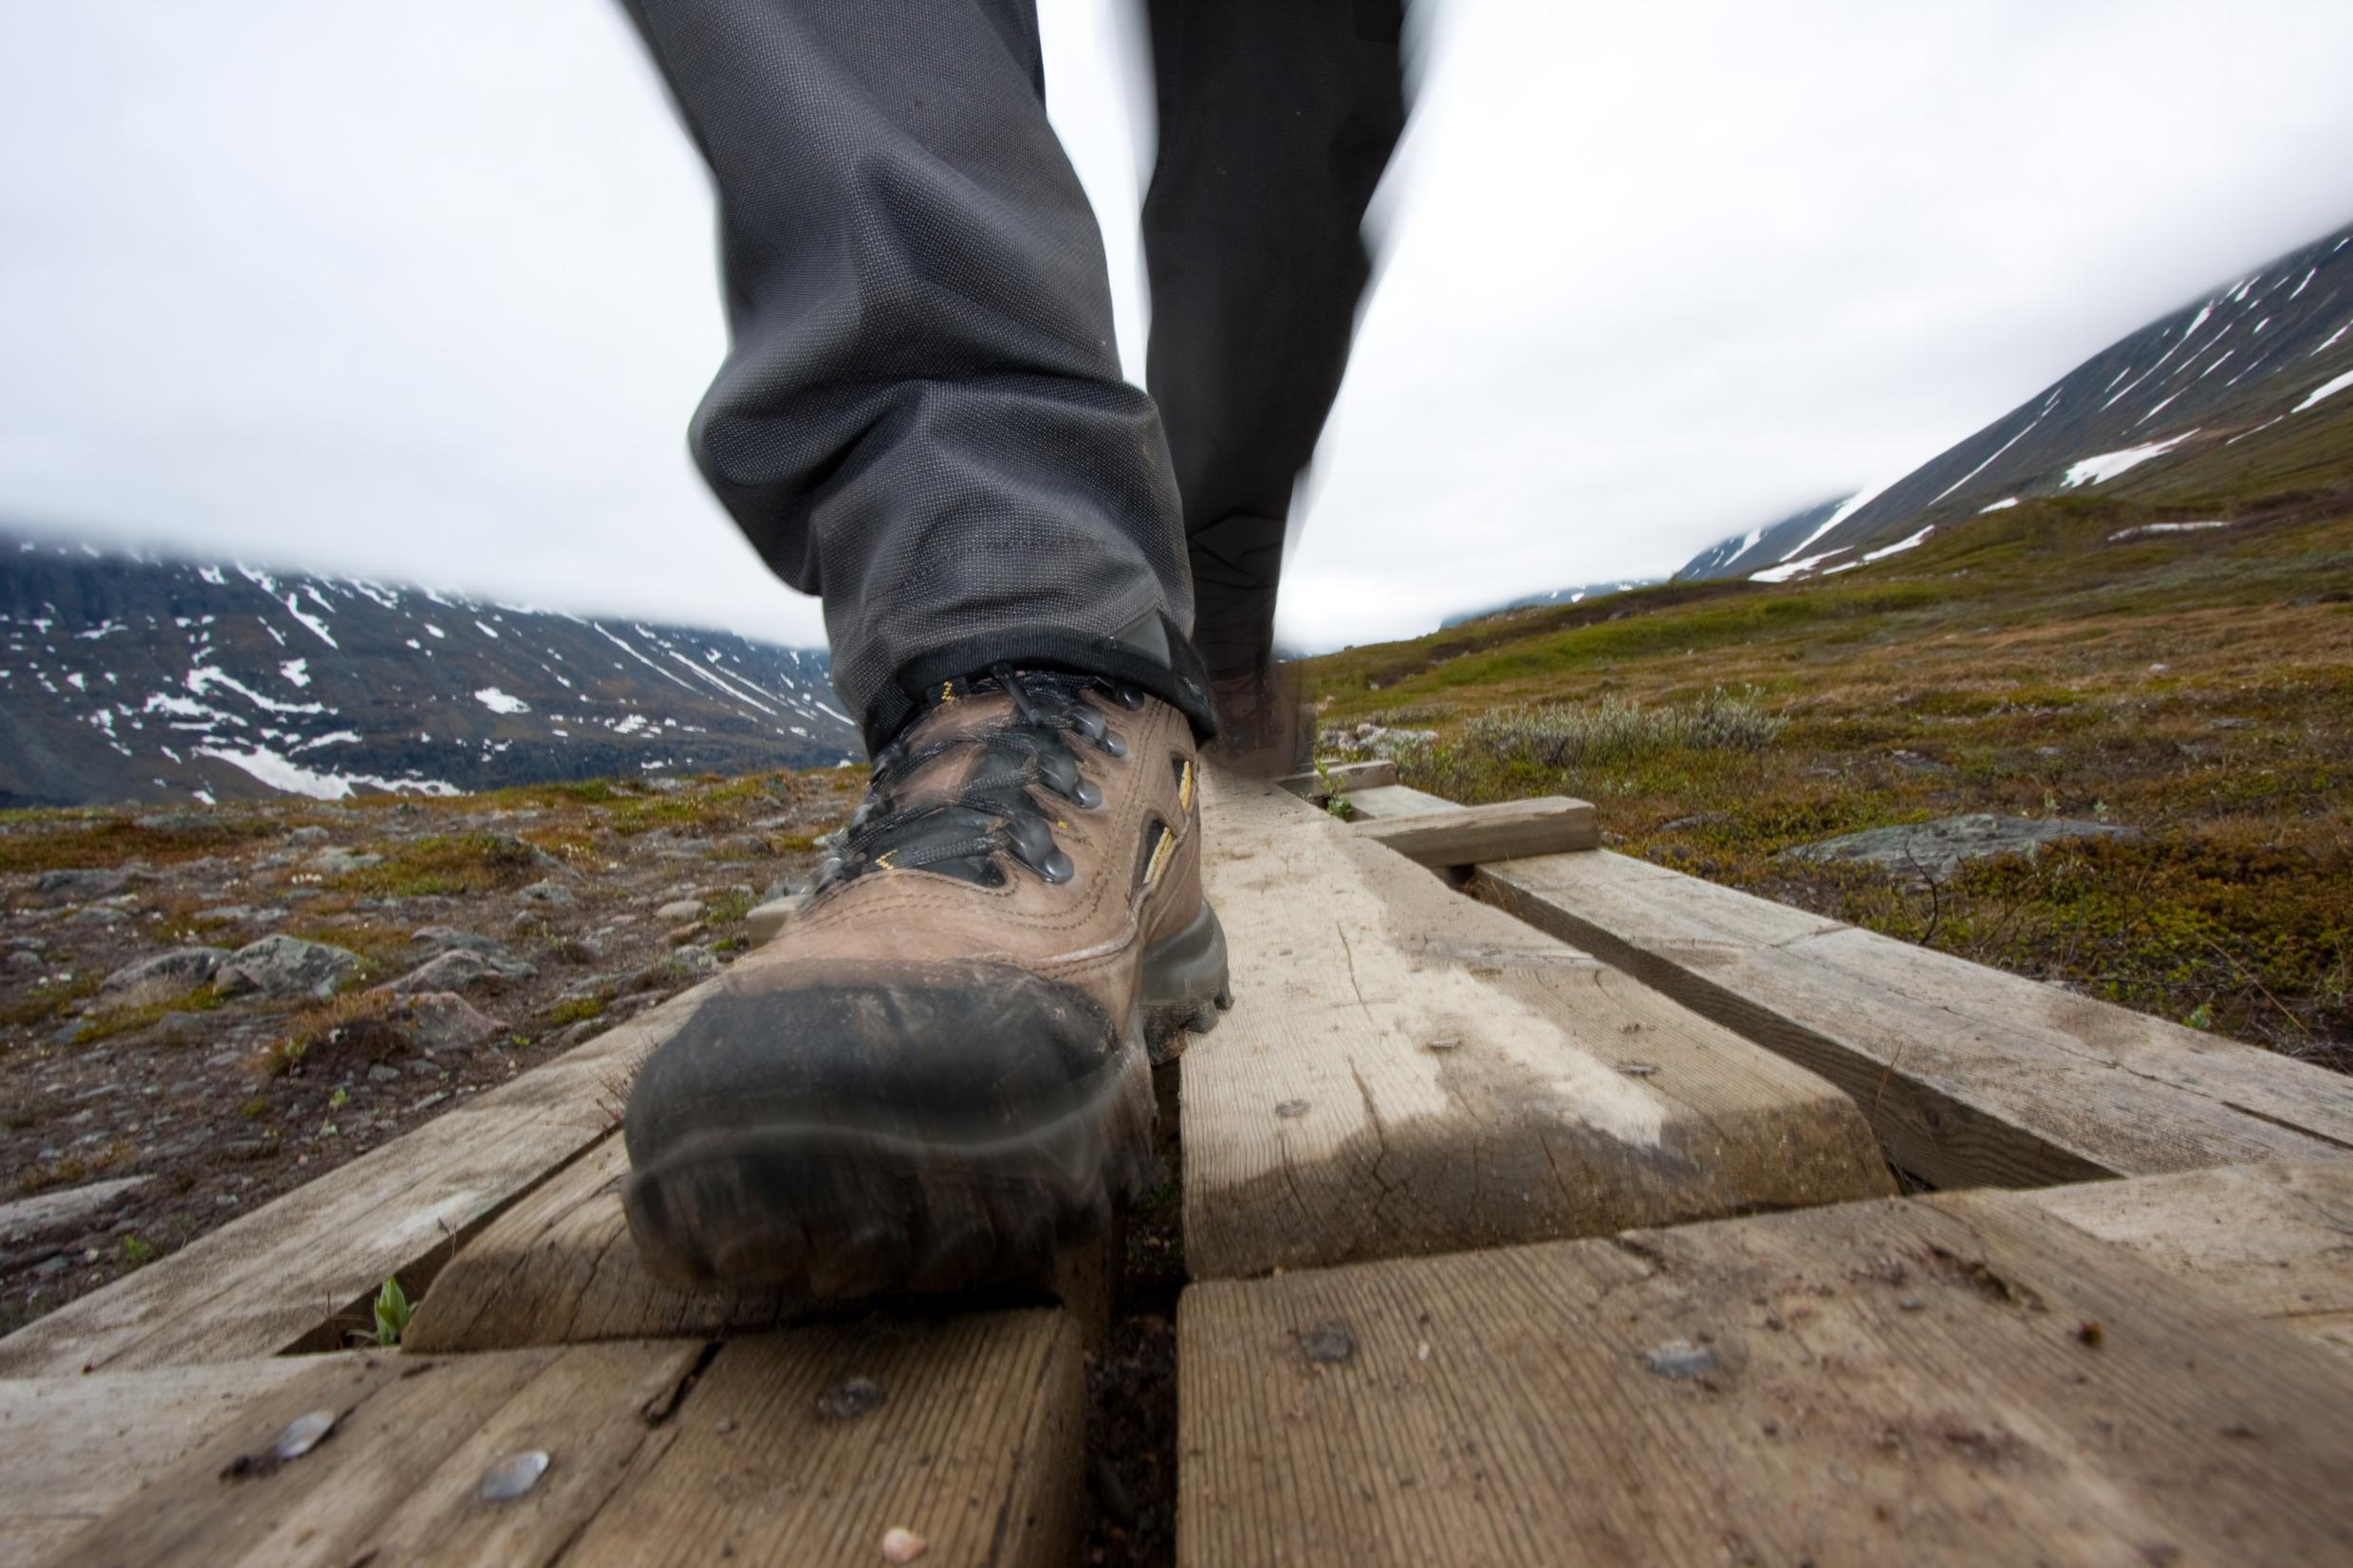 Close-up of a person's boots as he or she is walking on a foot-bridge across marsh lands around the Kebnekaise mountain region.